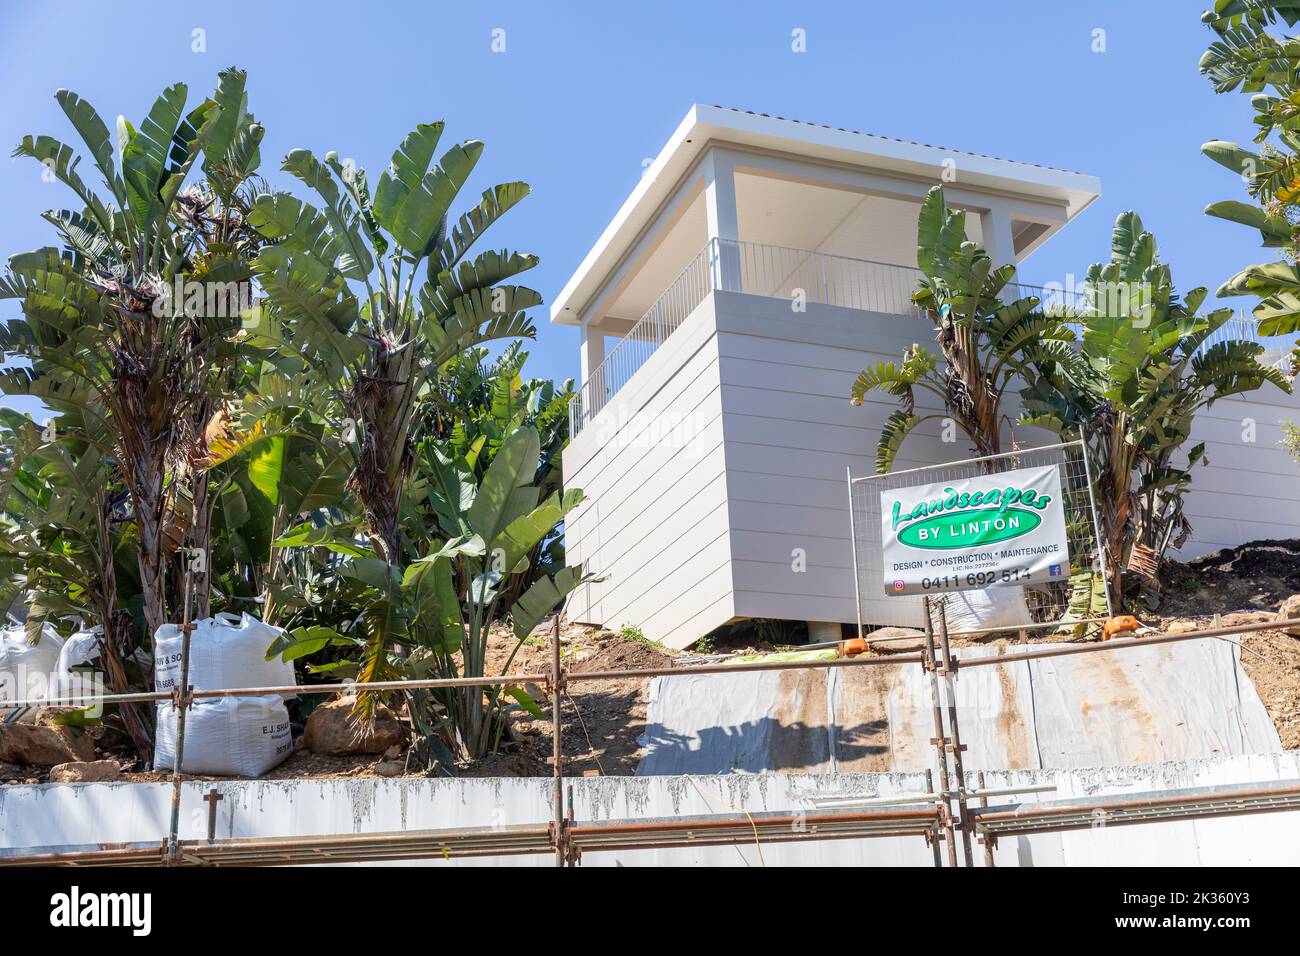 Landscaping project by a contractor at a house in Palm Beach,Sydney,NSW,Australia Stock Photo